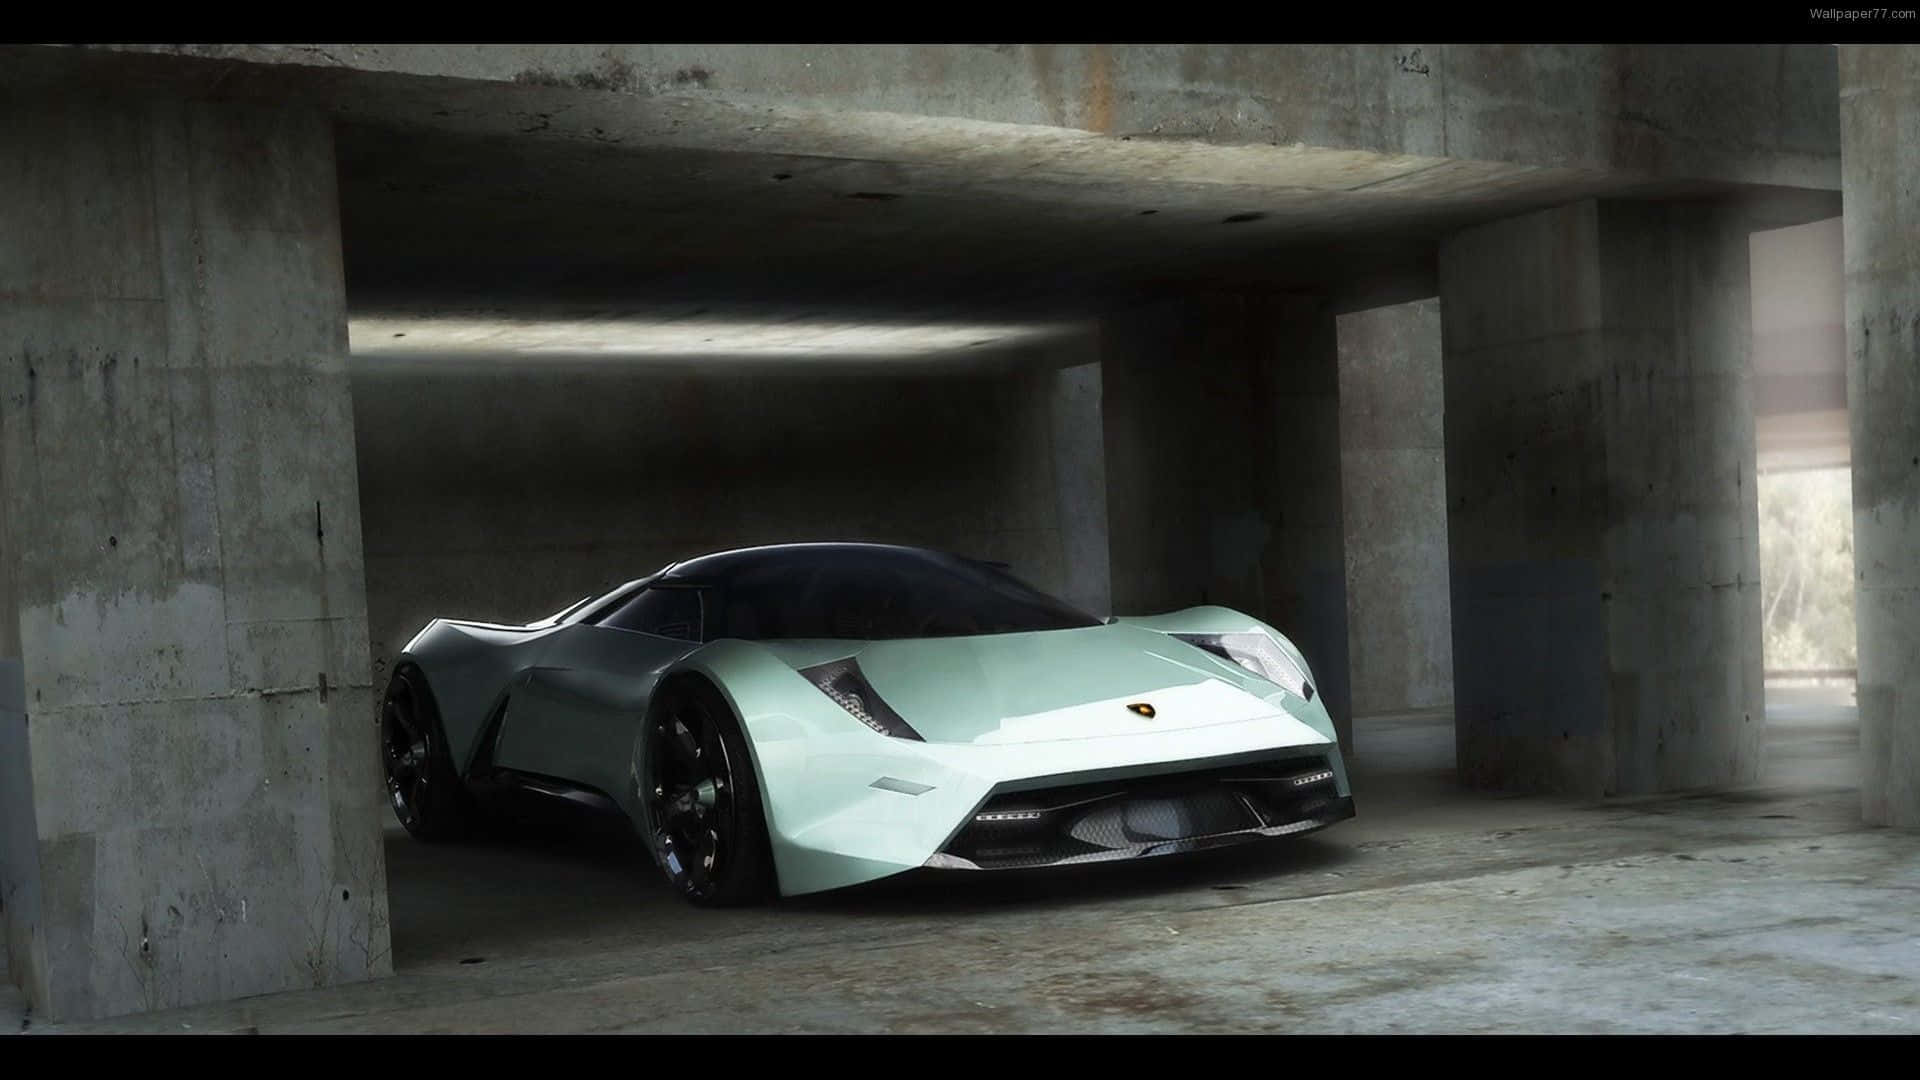 A Green Sports Car Is Parked In A Concrete Garage